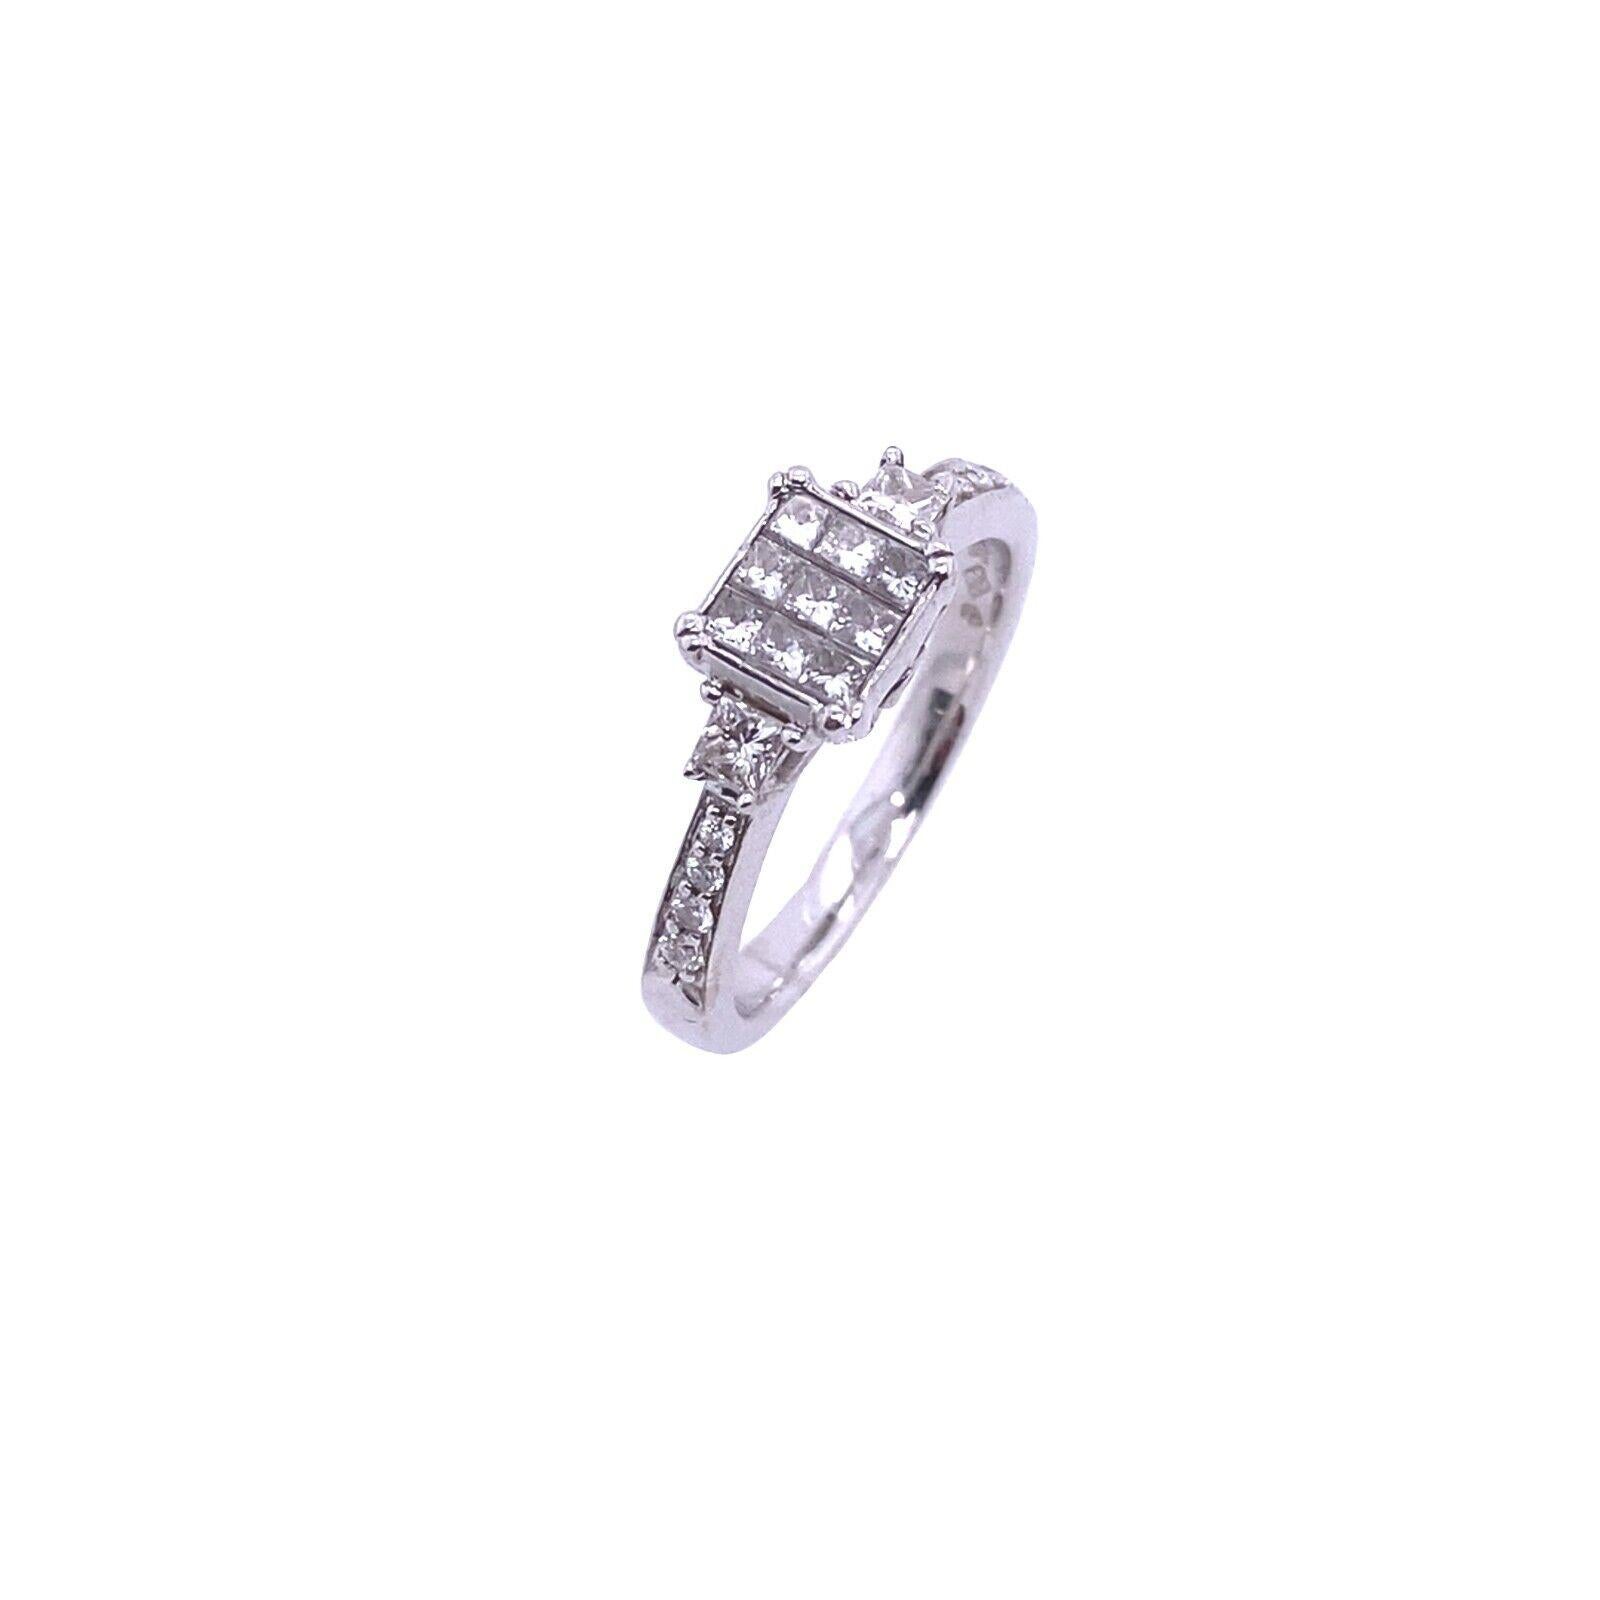 Princess Cut & Round Diamond Ring set with 0.50ct of Diamonds

This beautiful ring features round brilliant diamonds and a princess cut diamonds in a beautiful setting.

Additional Information: 
Total Diamond Weight: 0.50ct
Diamond Colour: